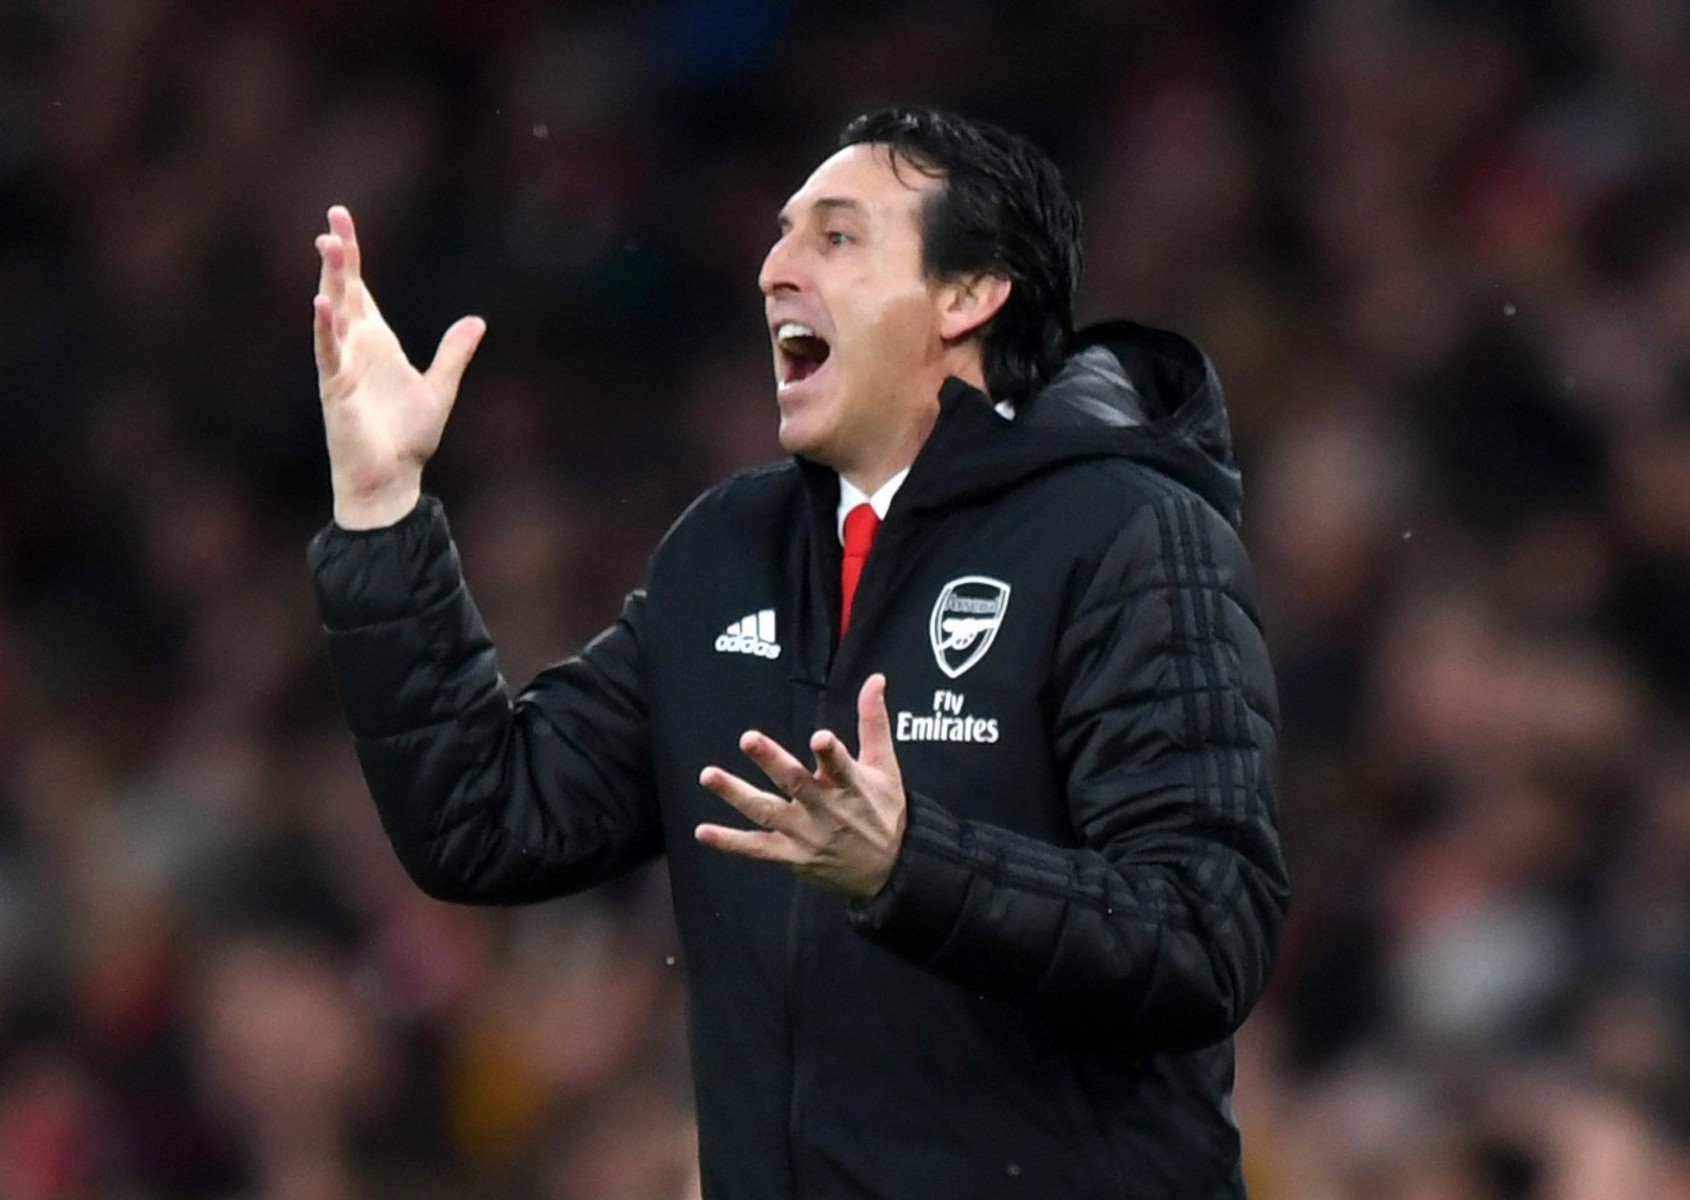 Unai Emery was determined to get his side's season back on track by beating struggling Southampton at home